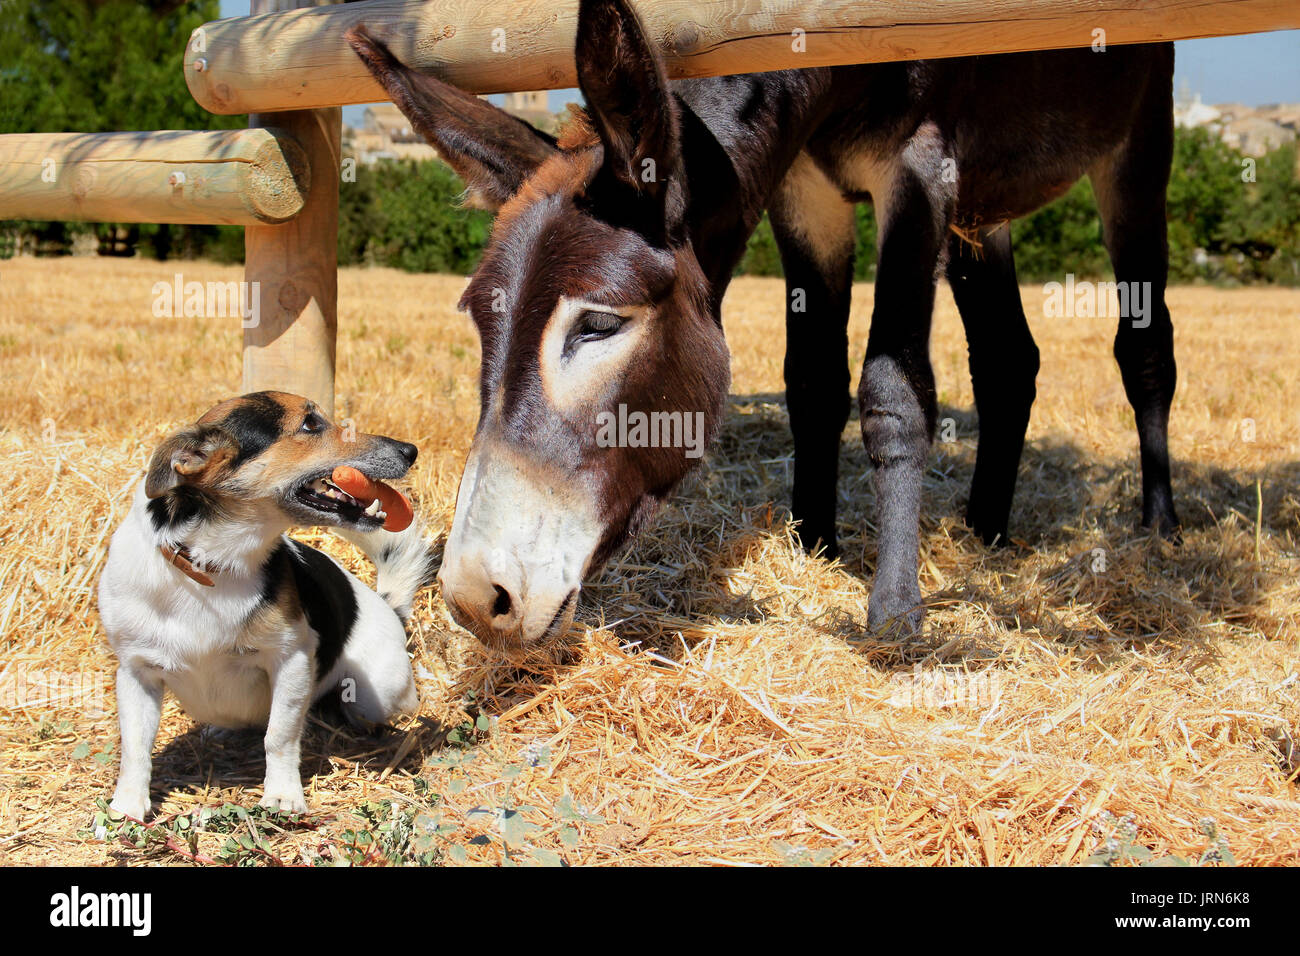 donkey and jack russell, dog holding a carrot close to a donkey head Stock Photo